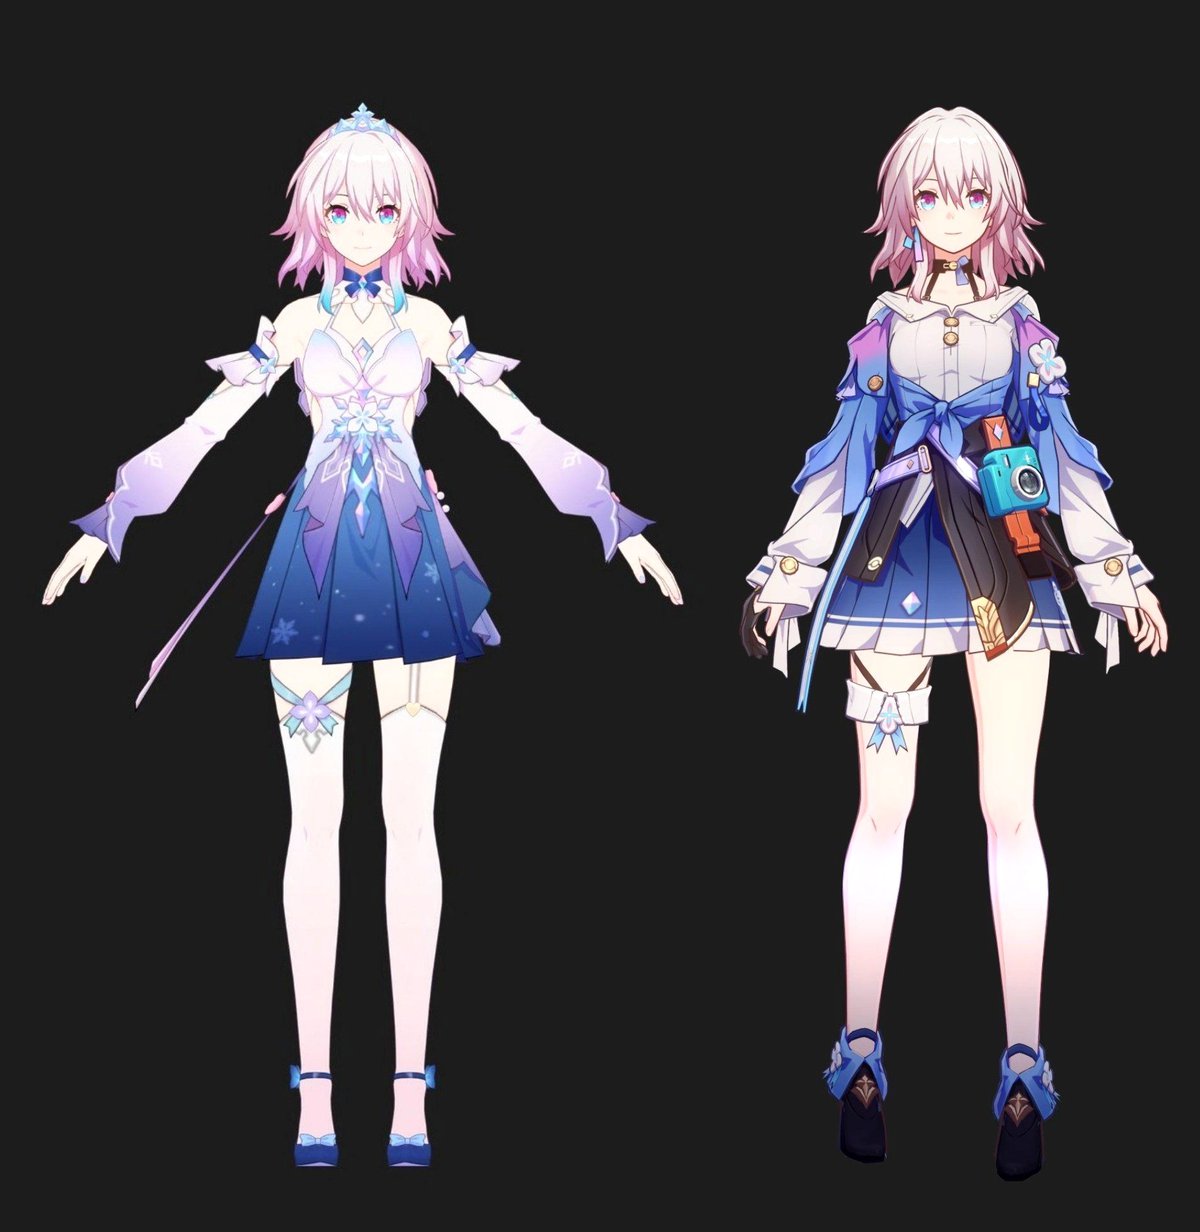 Will Honkai Star Rail have skins? Everything we know - Dexerto